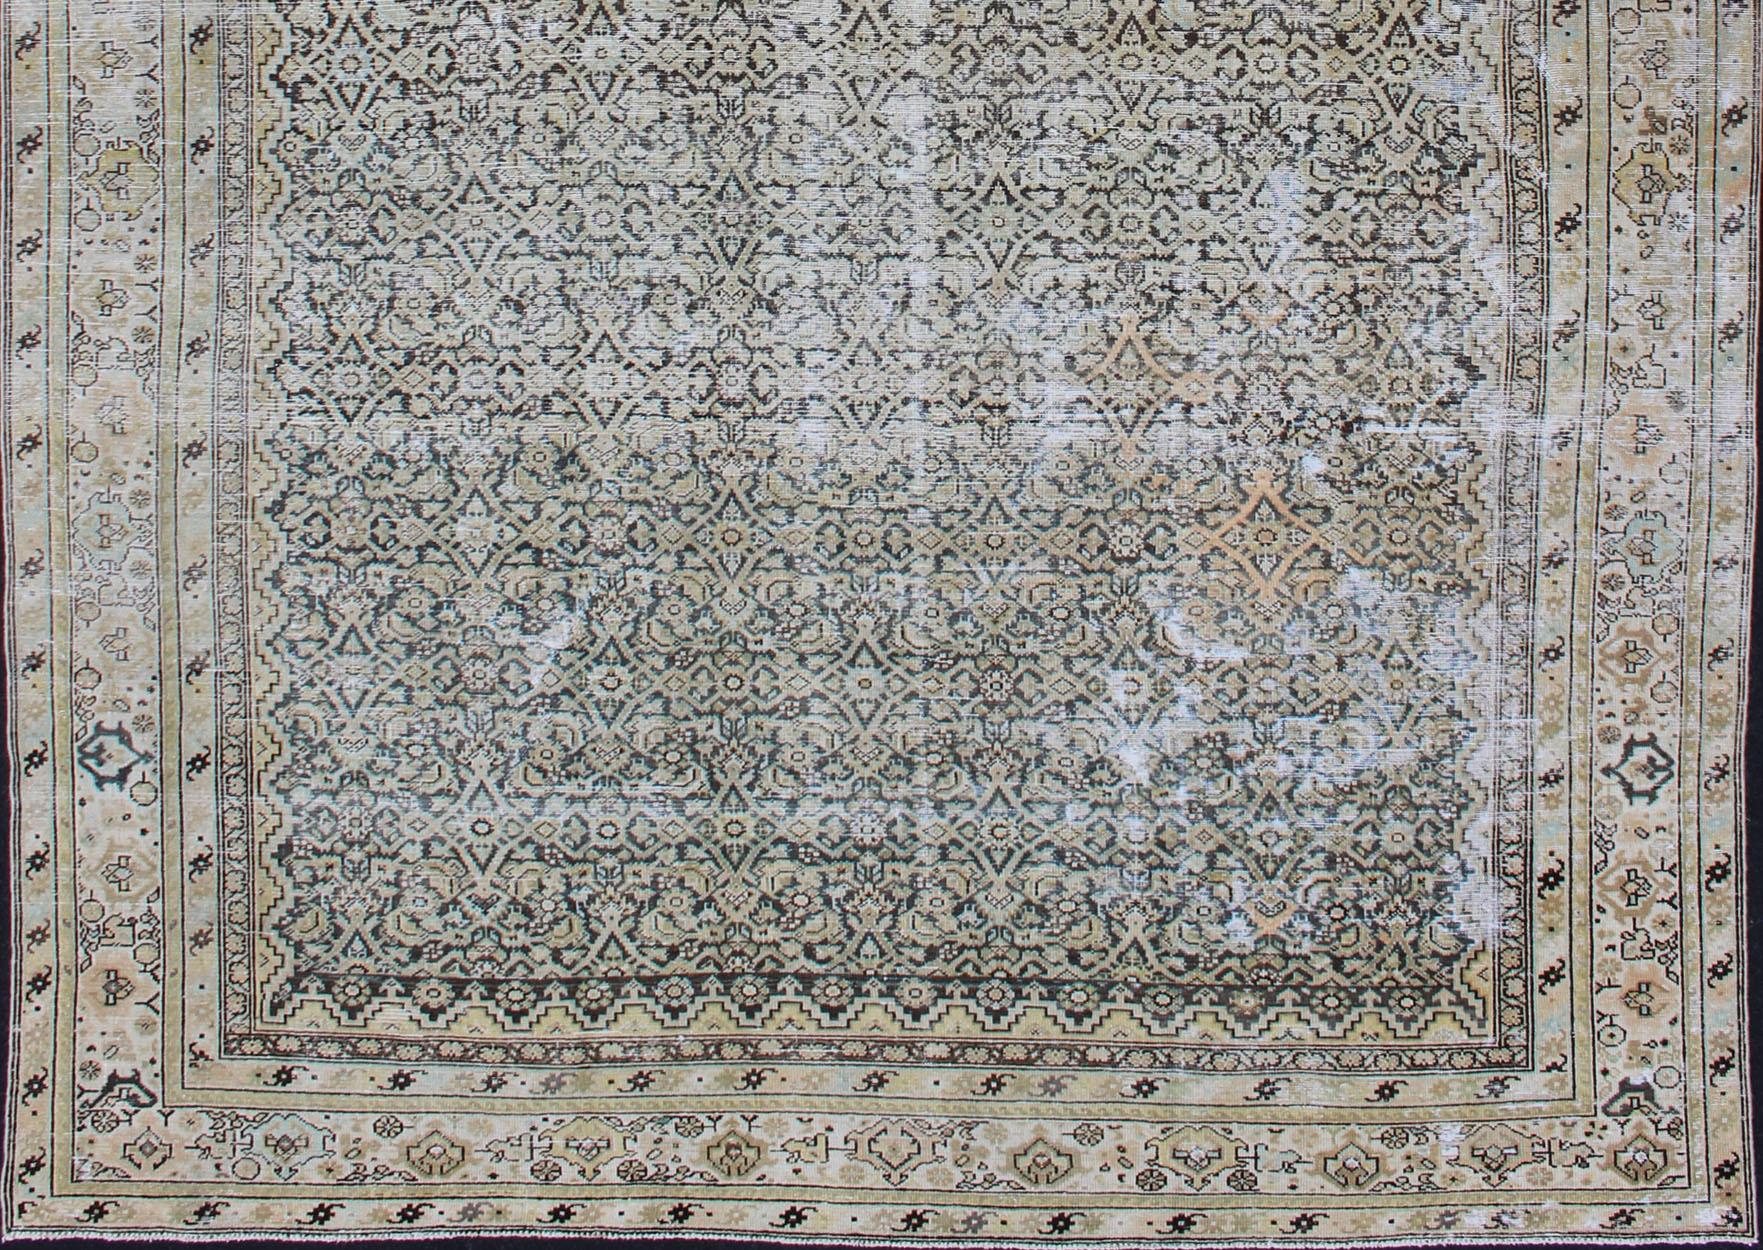 Hand-Knotted Large Gallery Persian Malayer Runner with Herati Design in Gray and Earth Tones